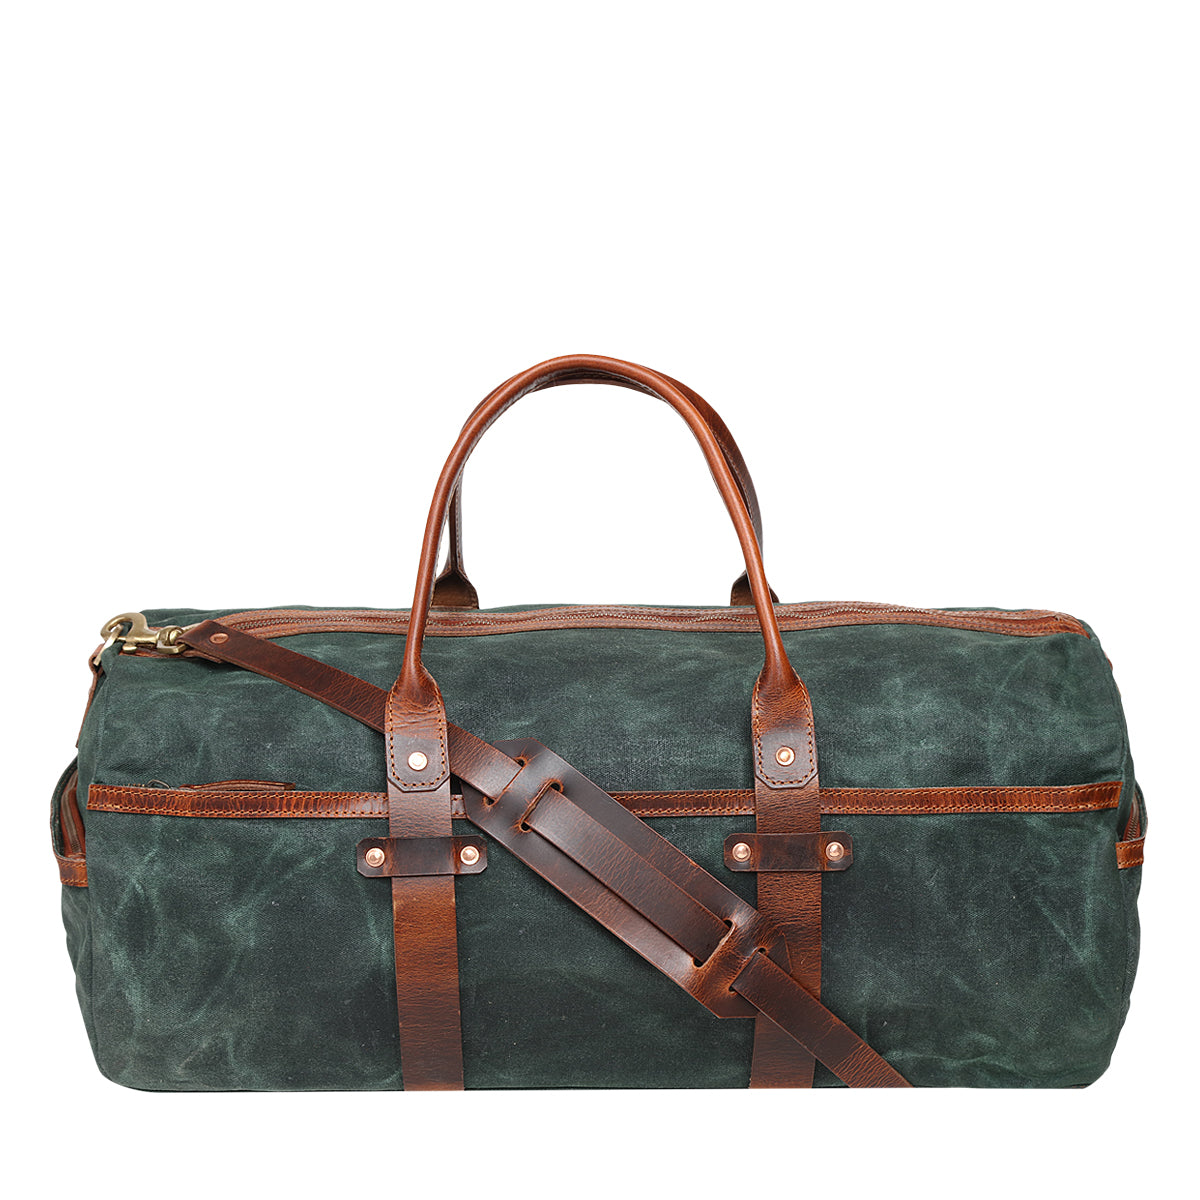 Woodland Duffle (Forest Green)